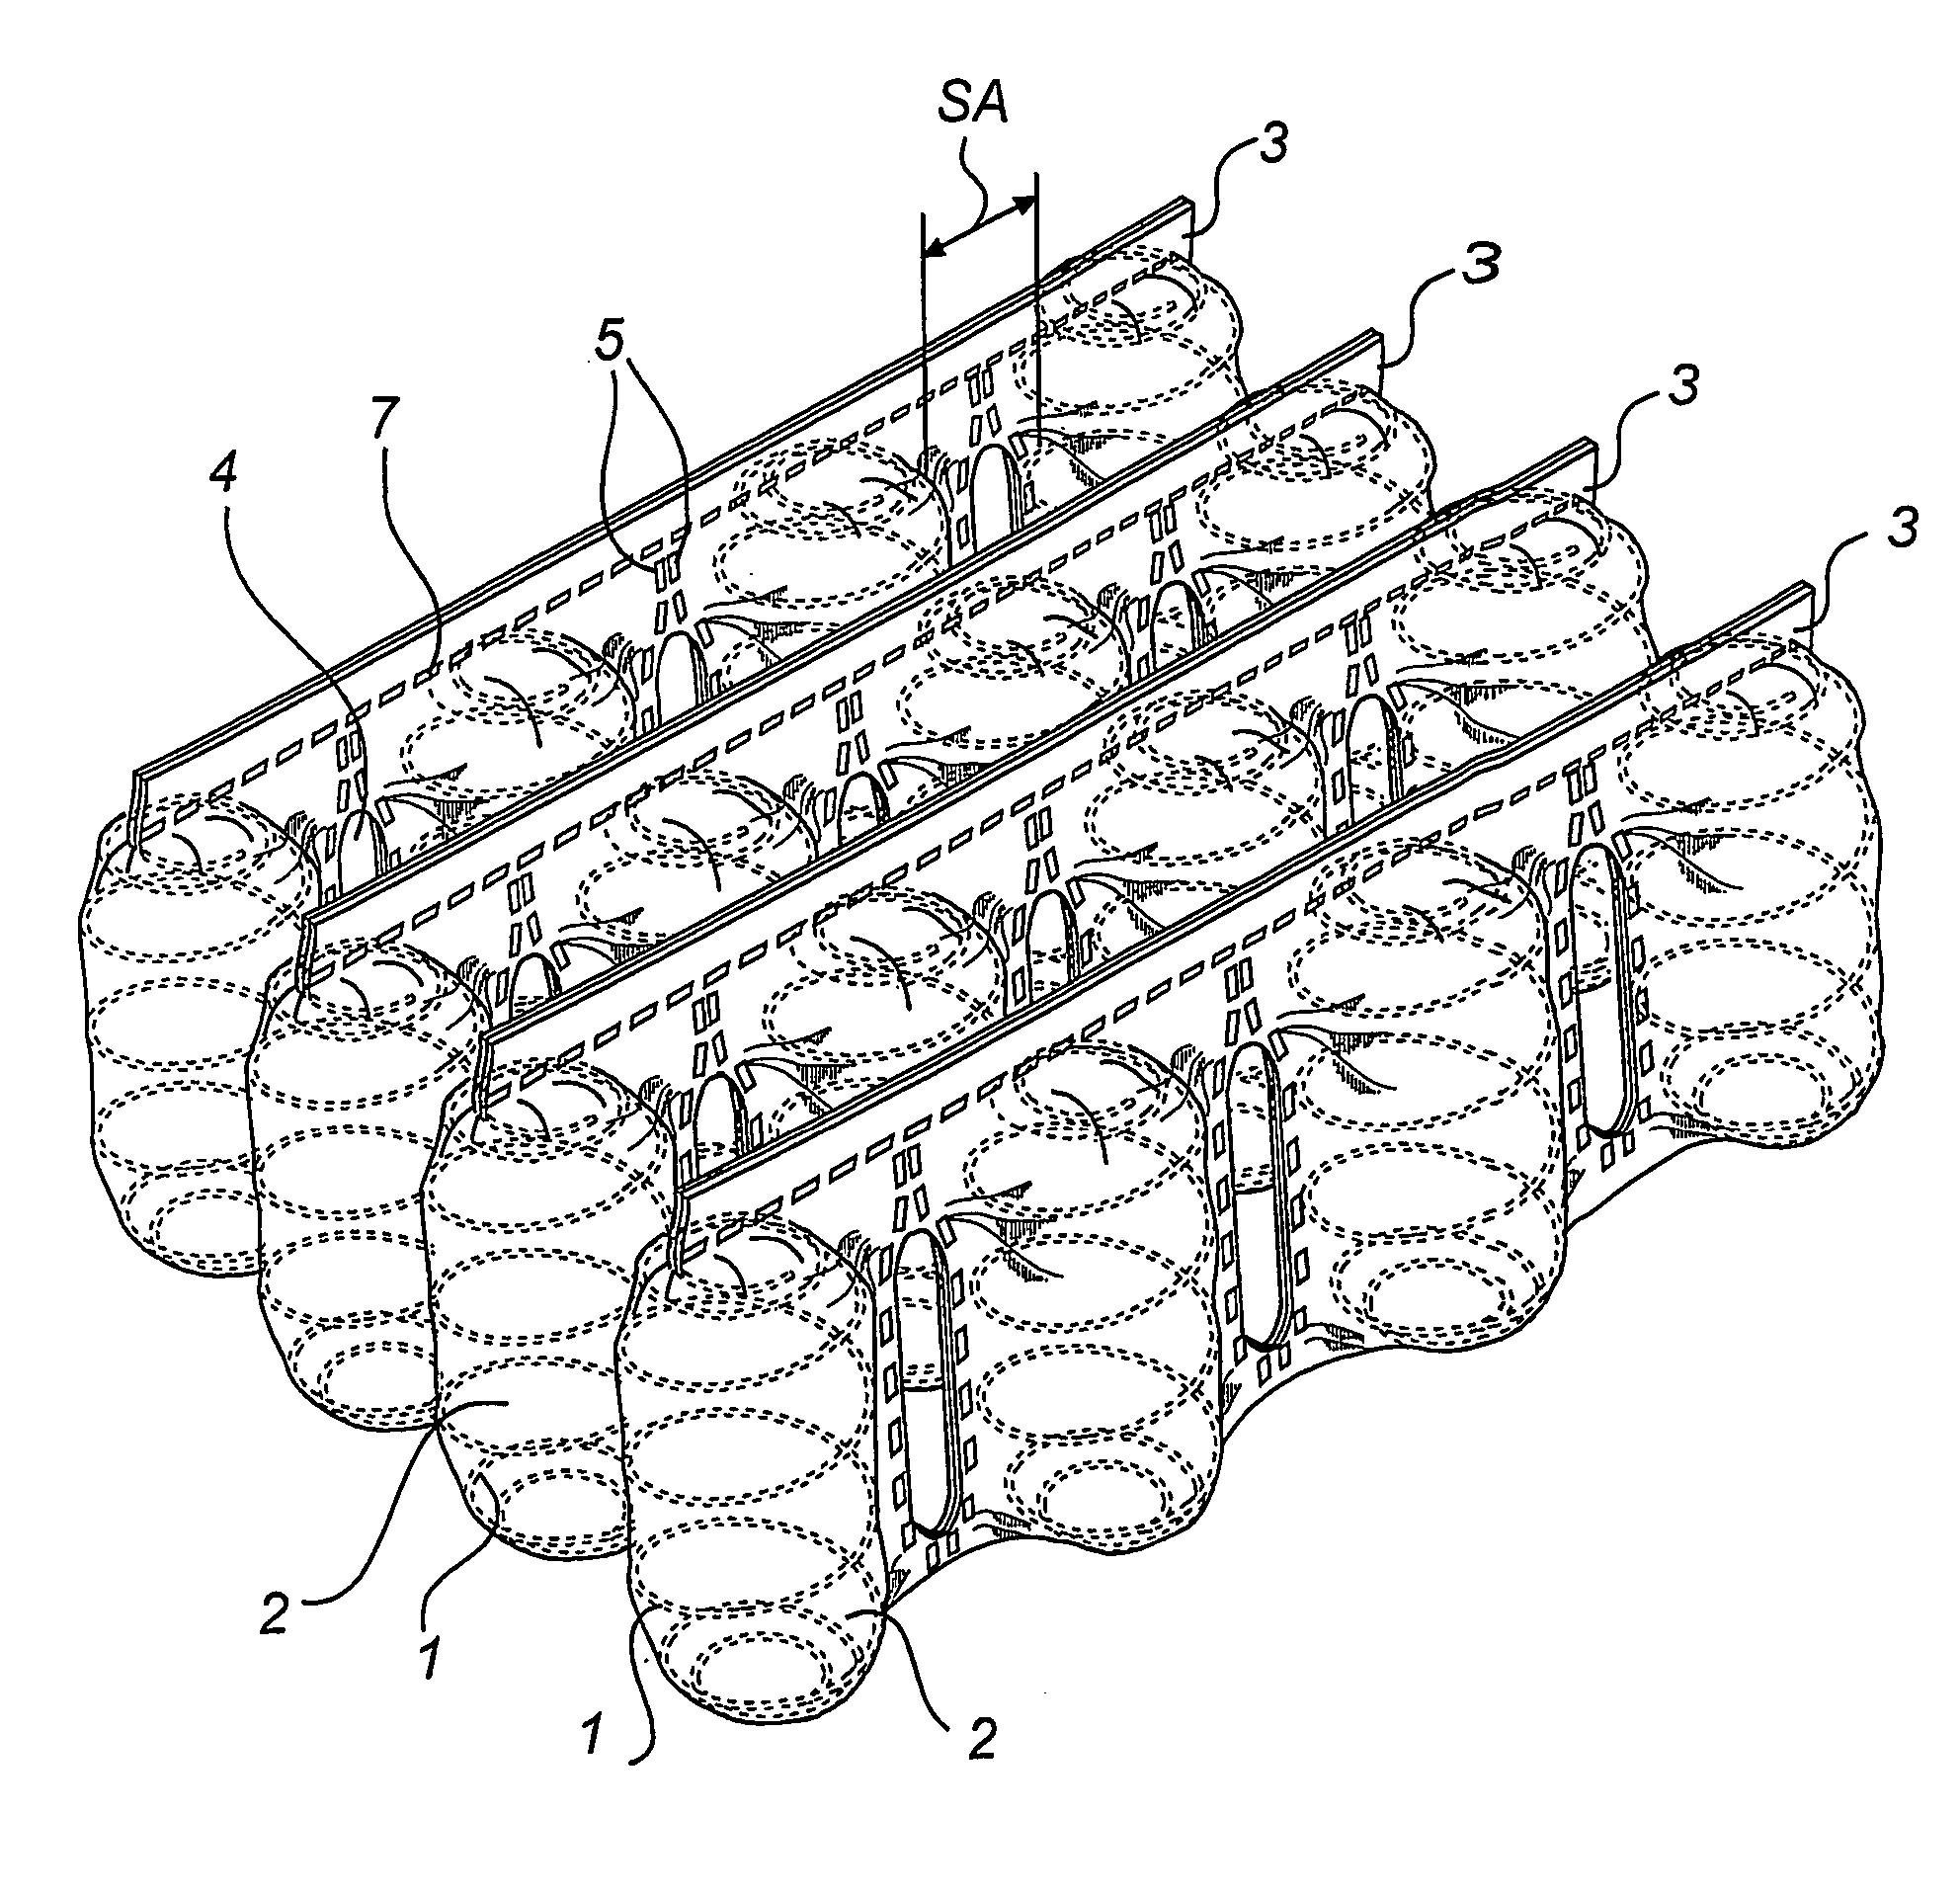 Separated pocket spring mattress with cut through string, and method and apparatus for production of such mattress